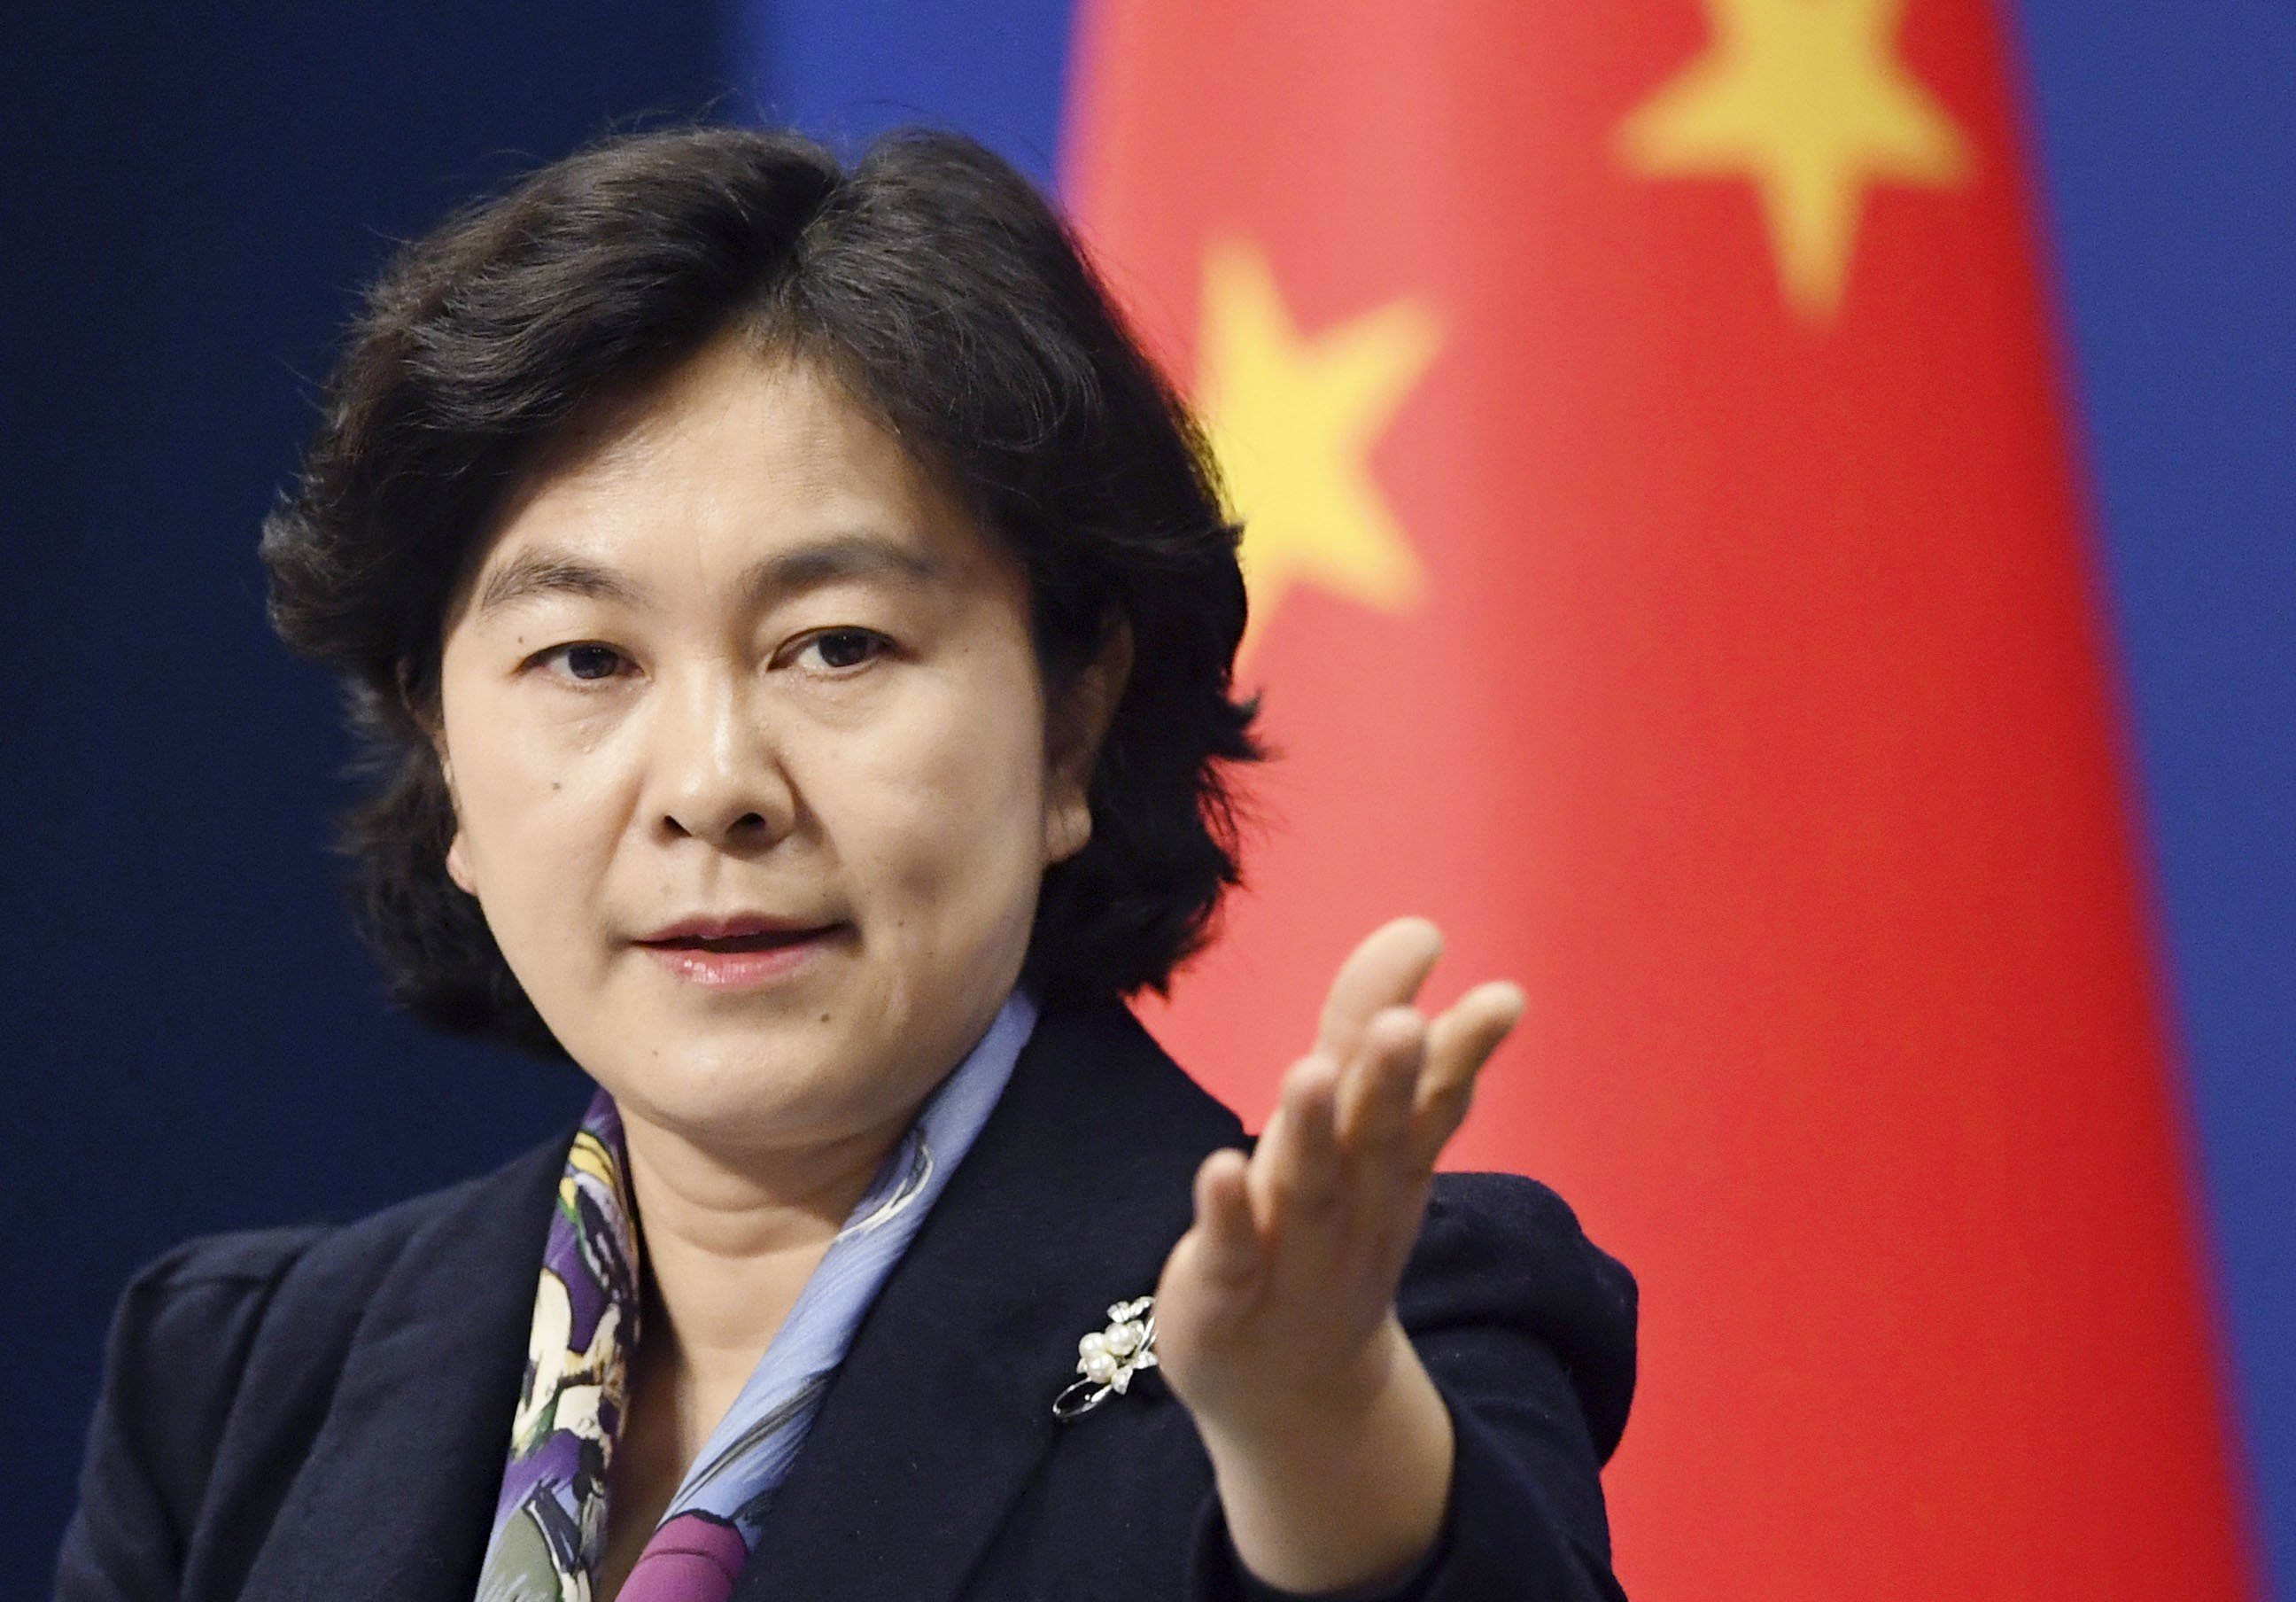 Chinese foreign ministry spokeswoman Hua Chunying was recently found to have liked a tweet calling on President Xi Jinping to step down. Photo: Kyodo